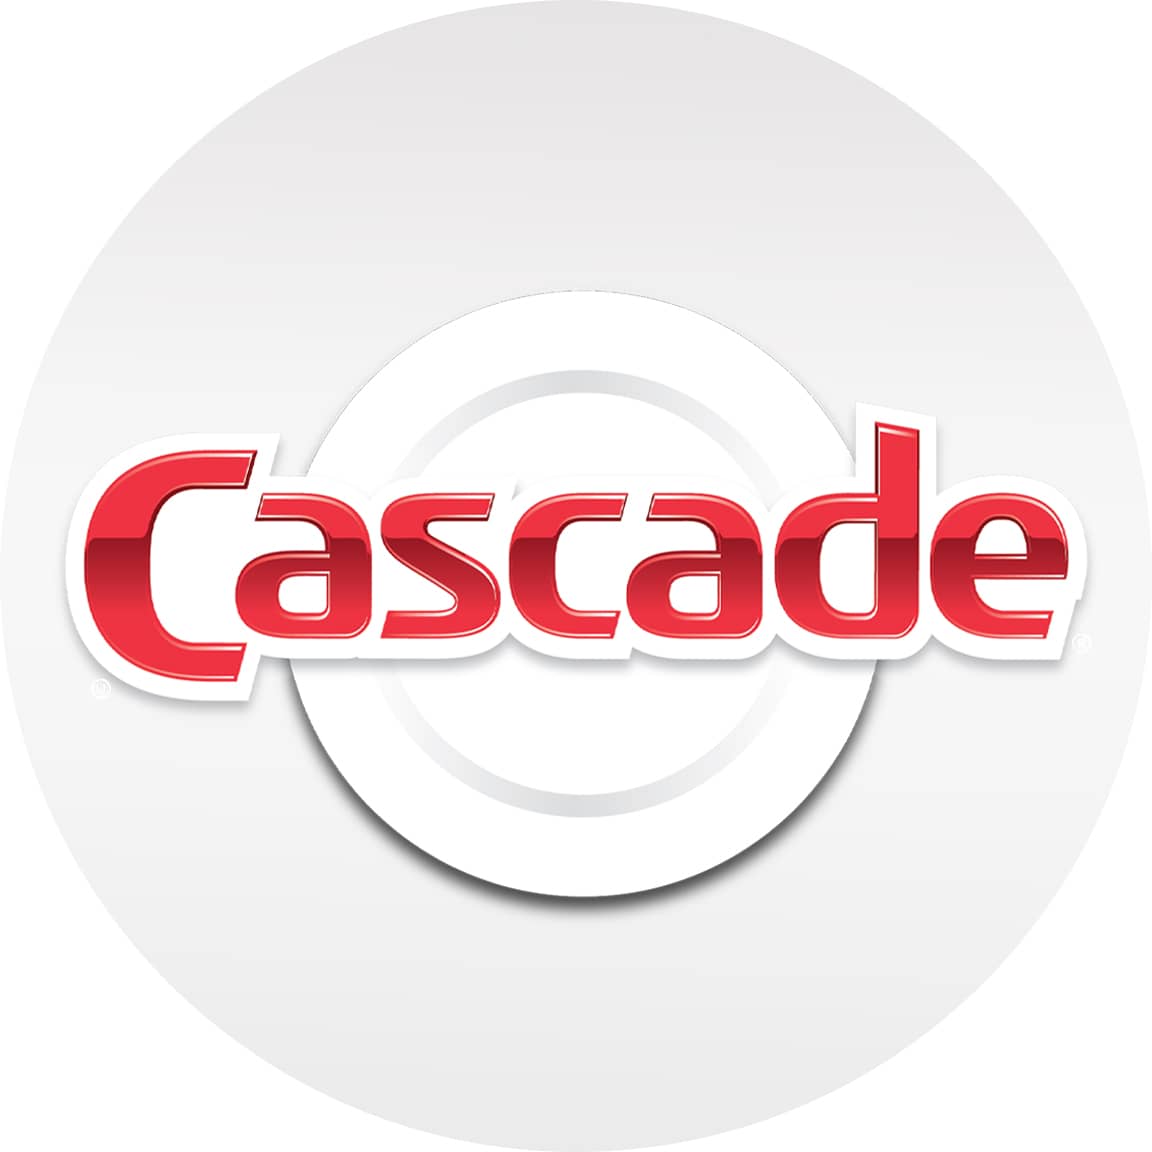 Shop for Cascade® brand products